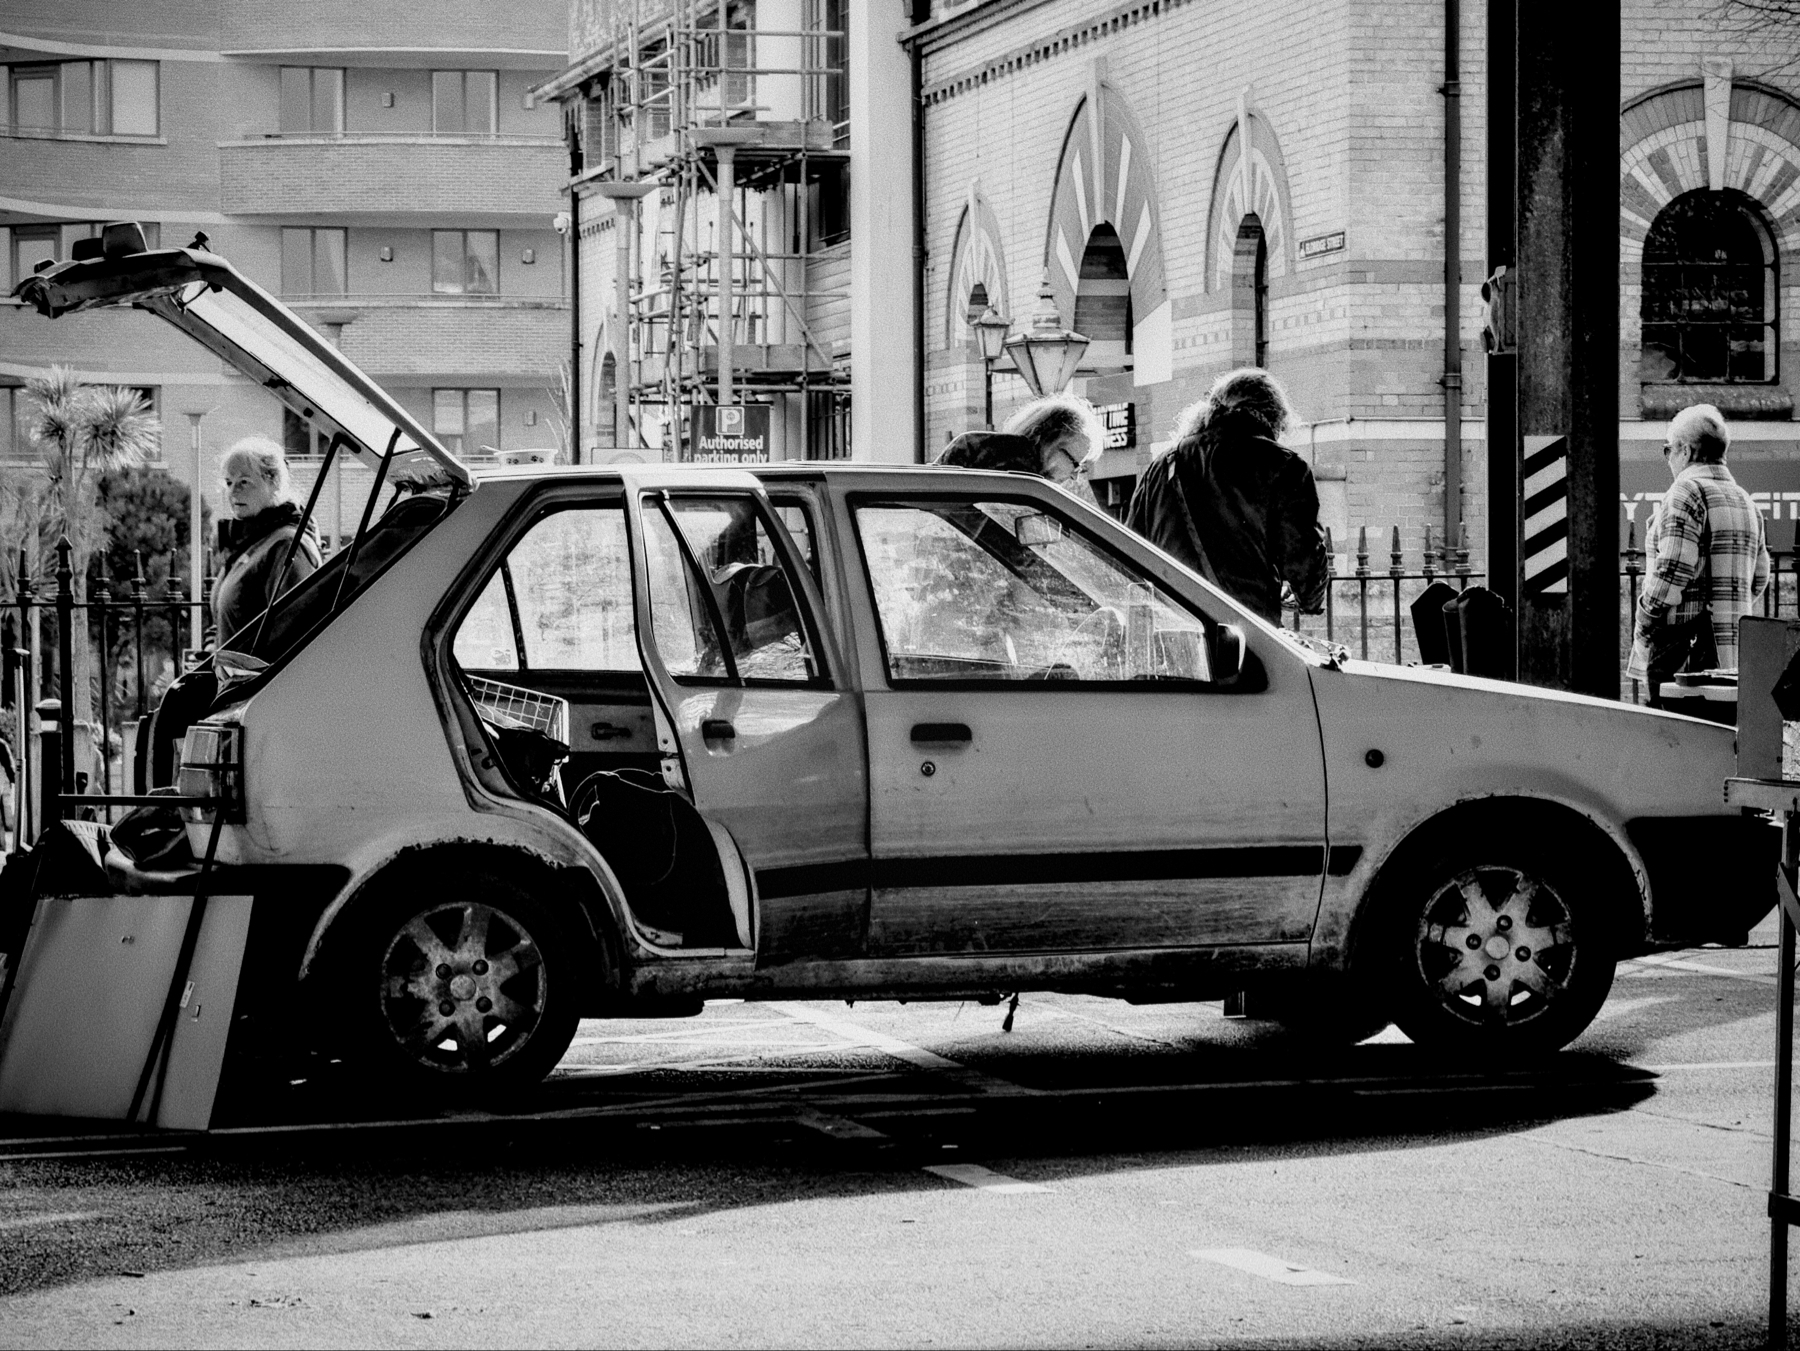 A black and white photograph of a heavily damaged car parked on a street with broken and missing parts, including doors and windows, with people walking by in the background.